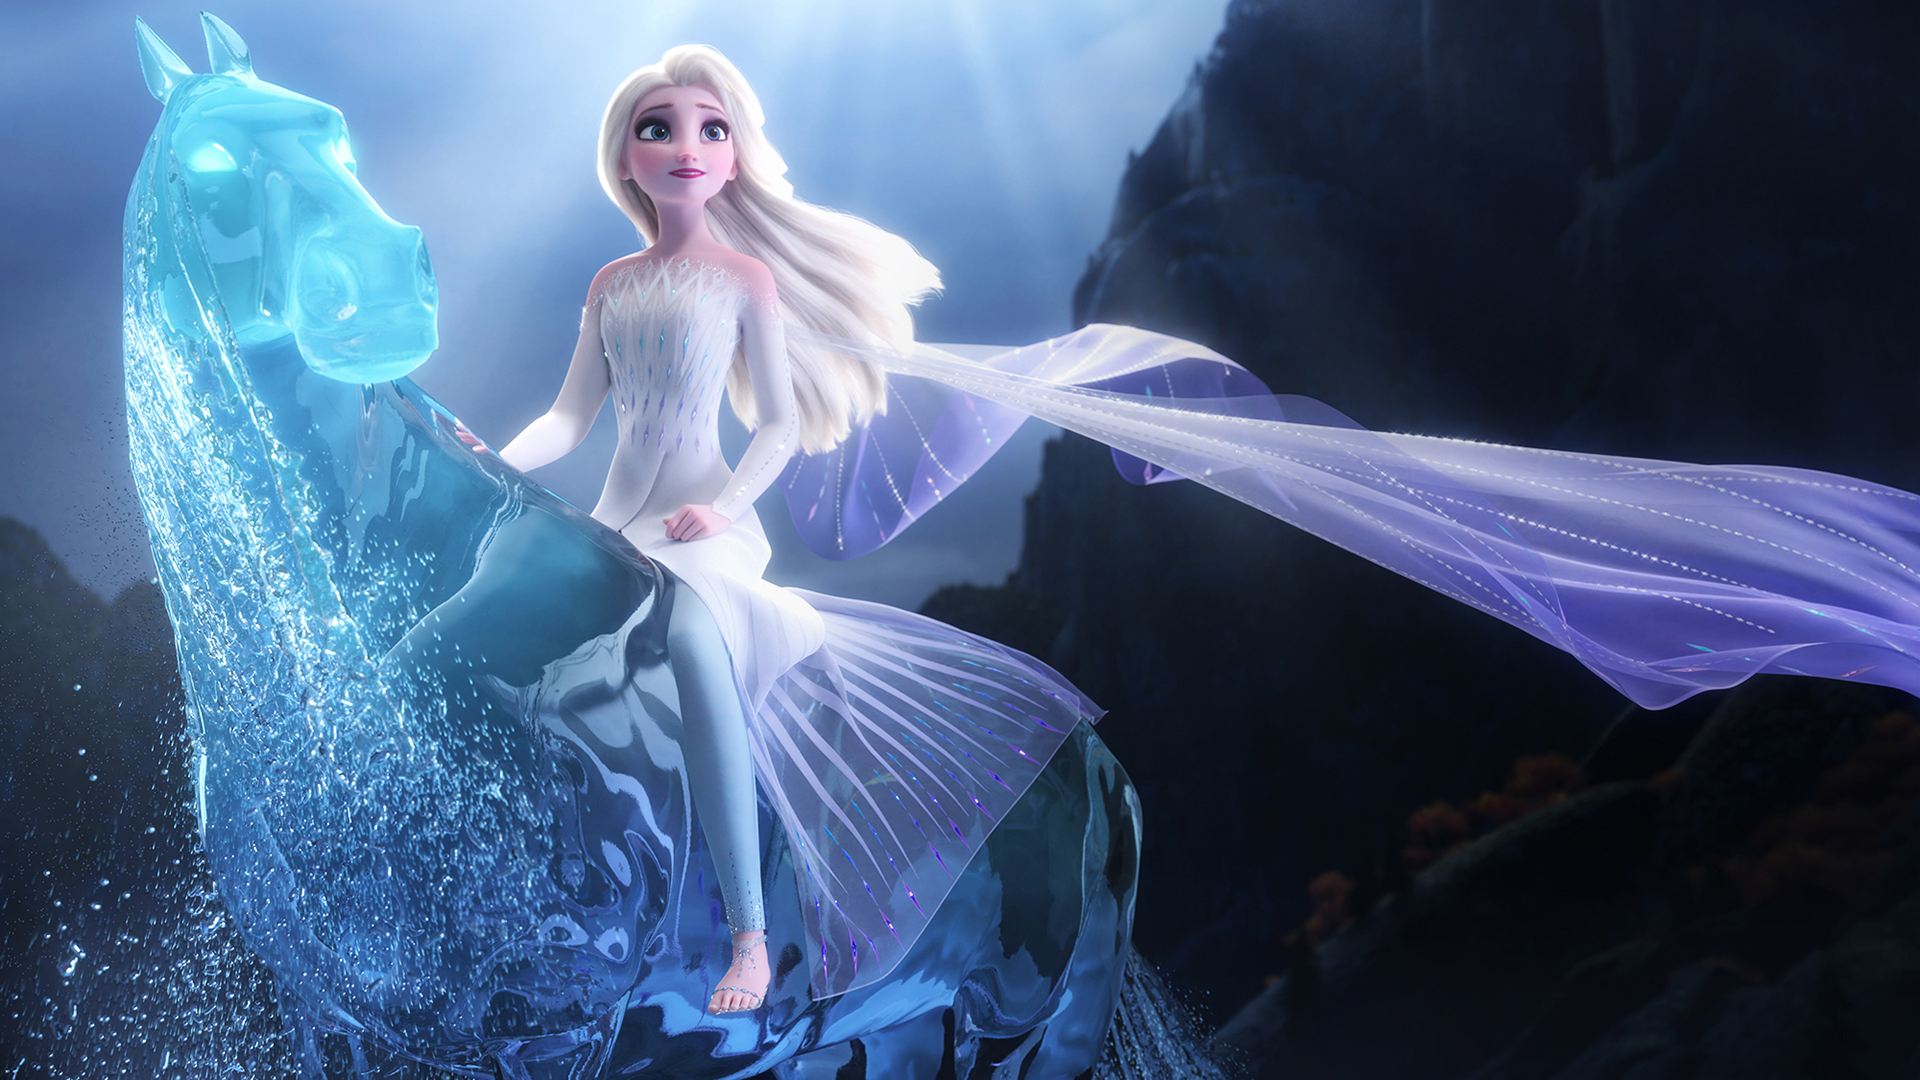 HD image Elsa as the fifth element from the Frozen 2 final shows that is not barefoot. Elsa got very delicate semi-transparent sandals with crystals. - YouLoveIt.com